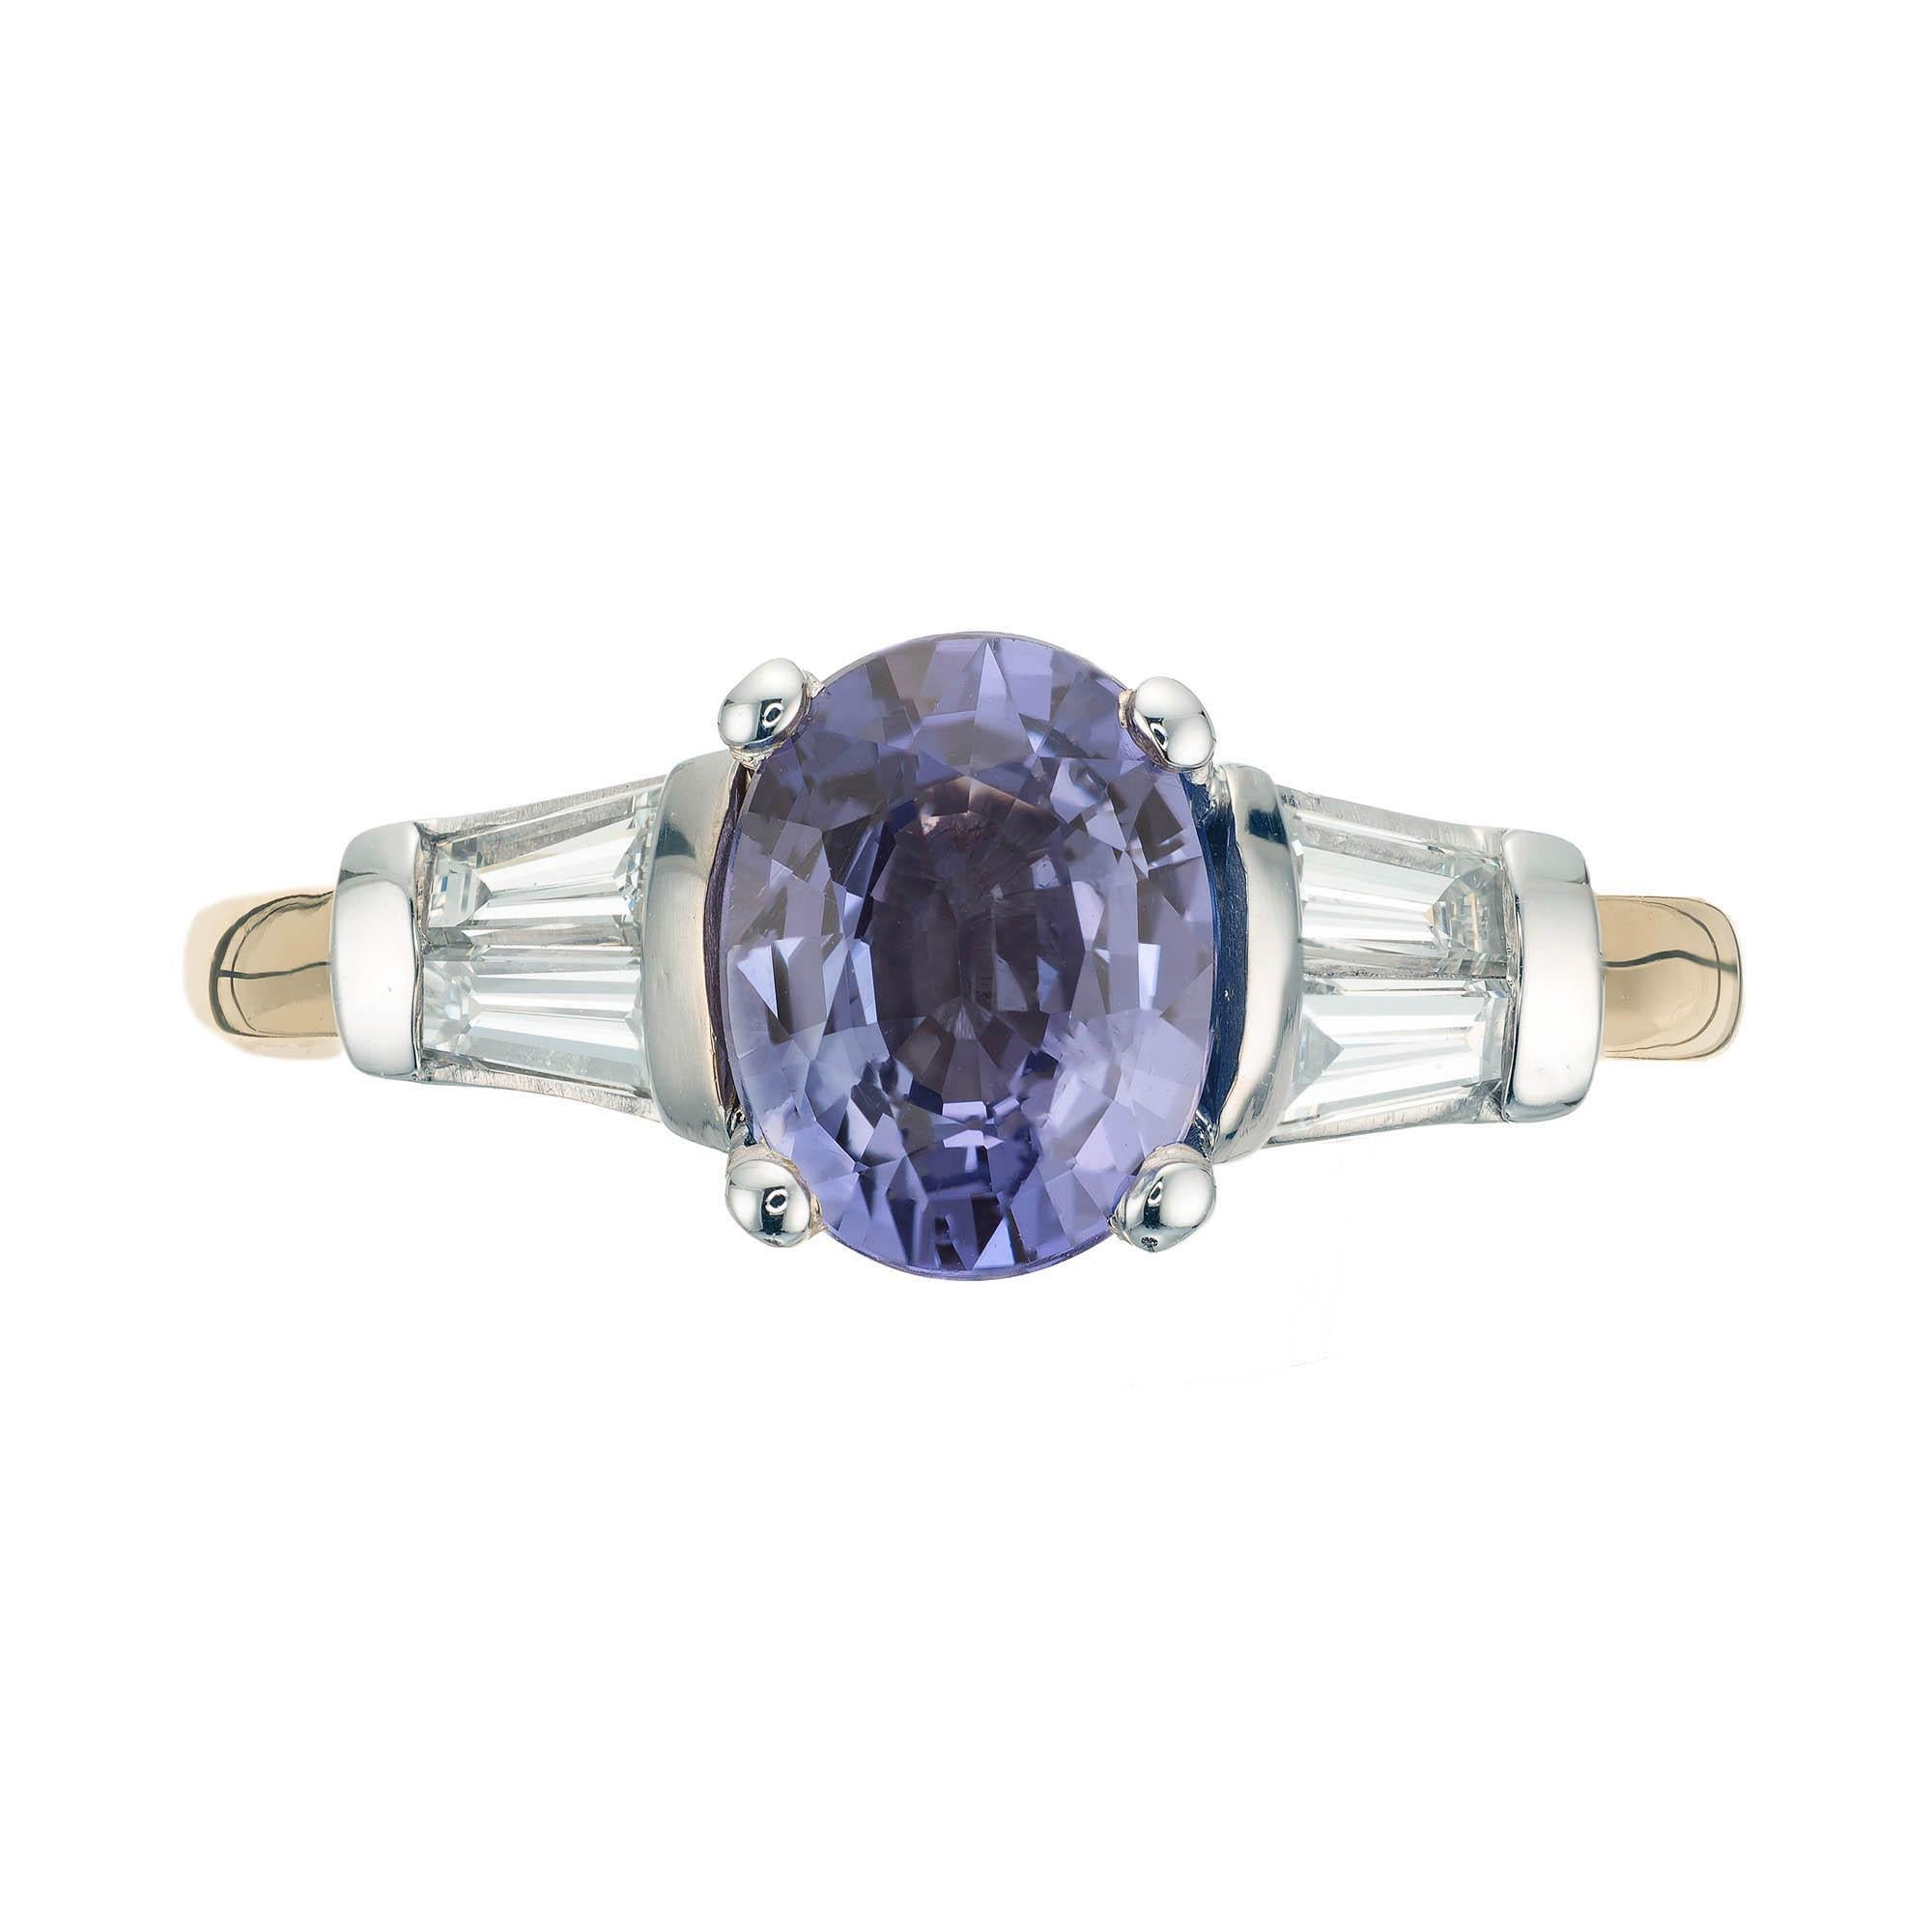 Peter Suchy  oval sapphire and diamond engagement ring. 18k yellow and white gold setting with two baguette diamonds. 

1 oval step cut violet/purple sapphire, Approximate 1.70ct GIA certificate # 2185764272 
4 tapered baguette H-I VS diamonds,